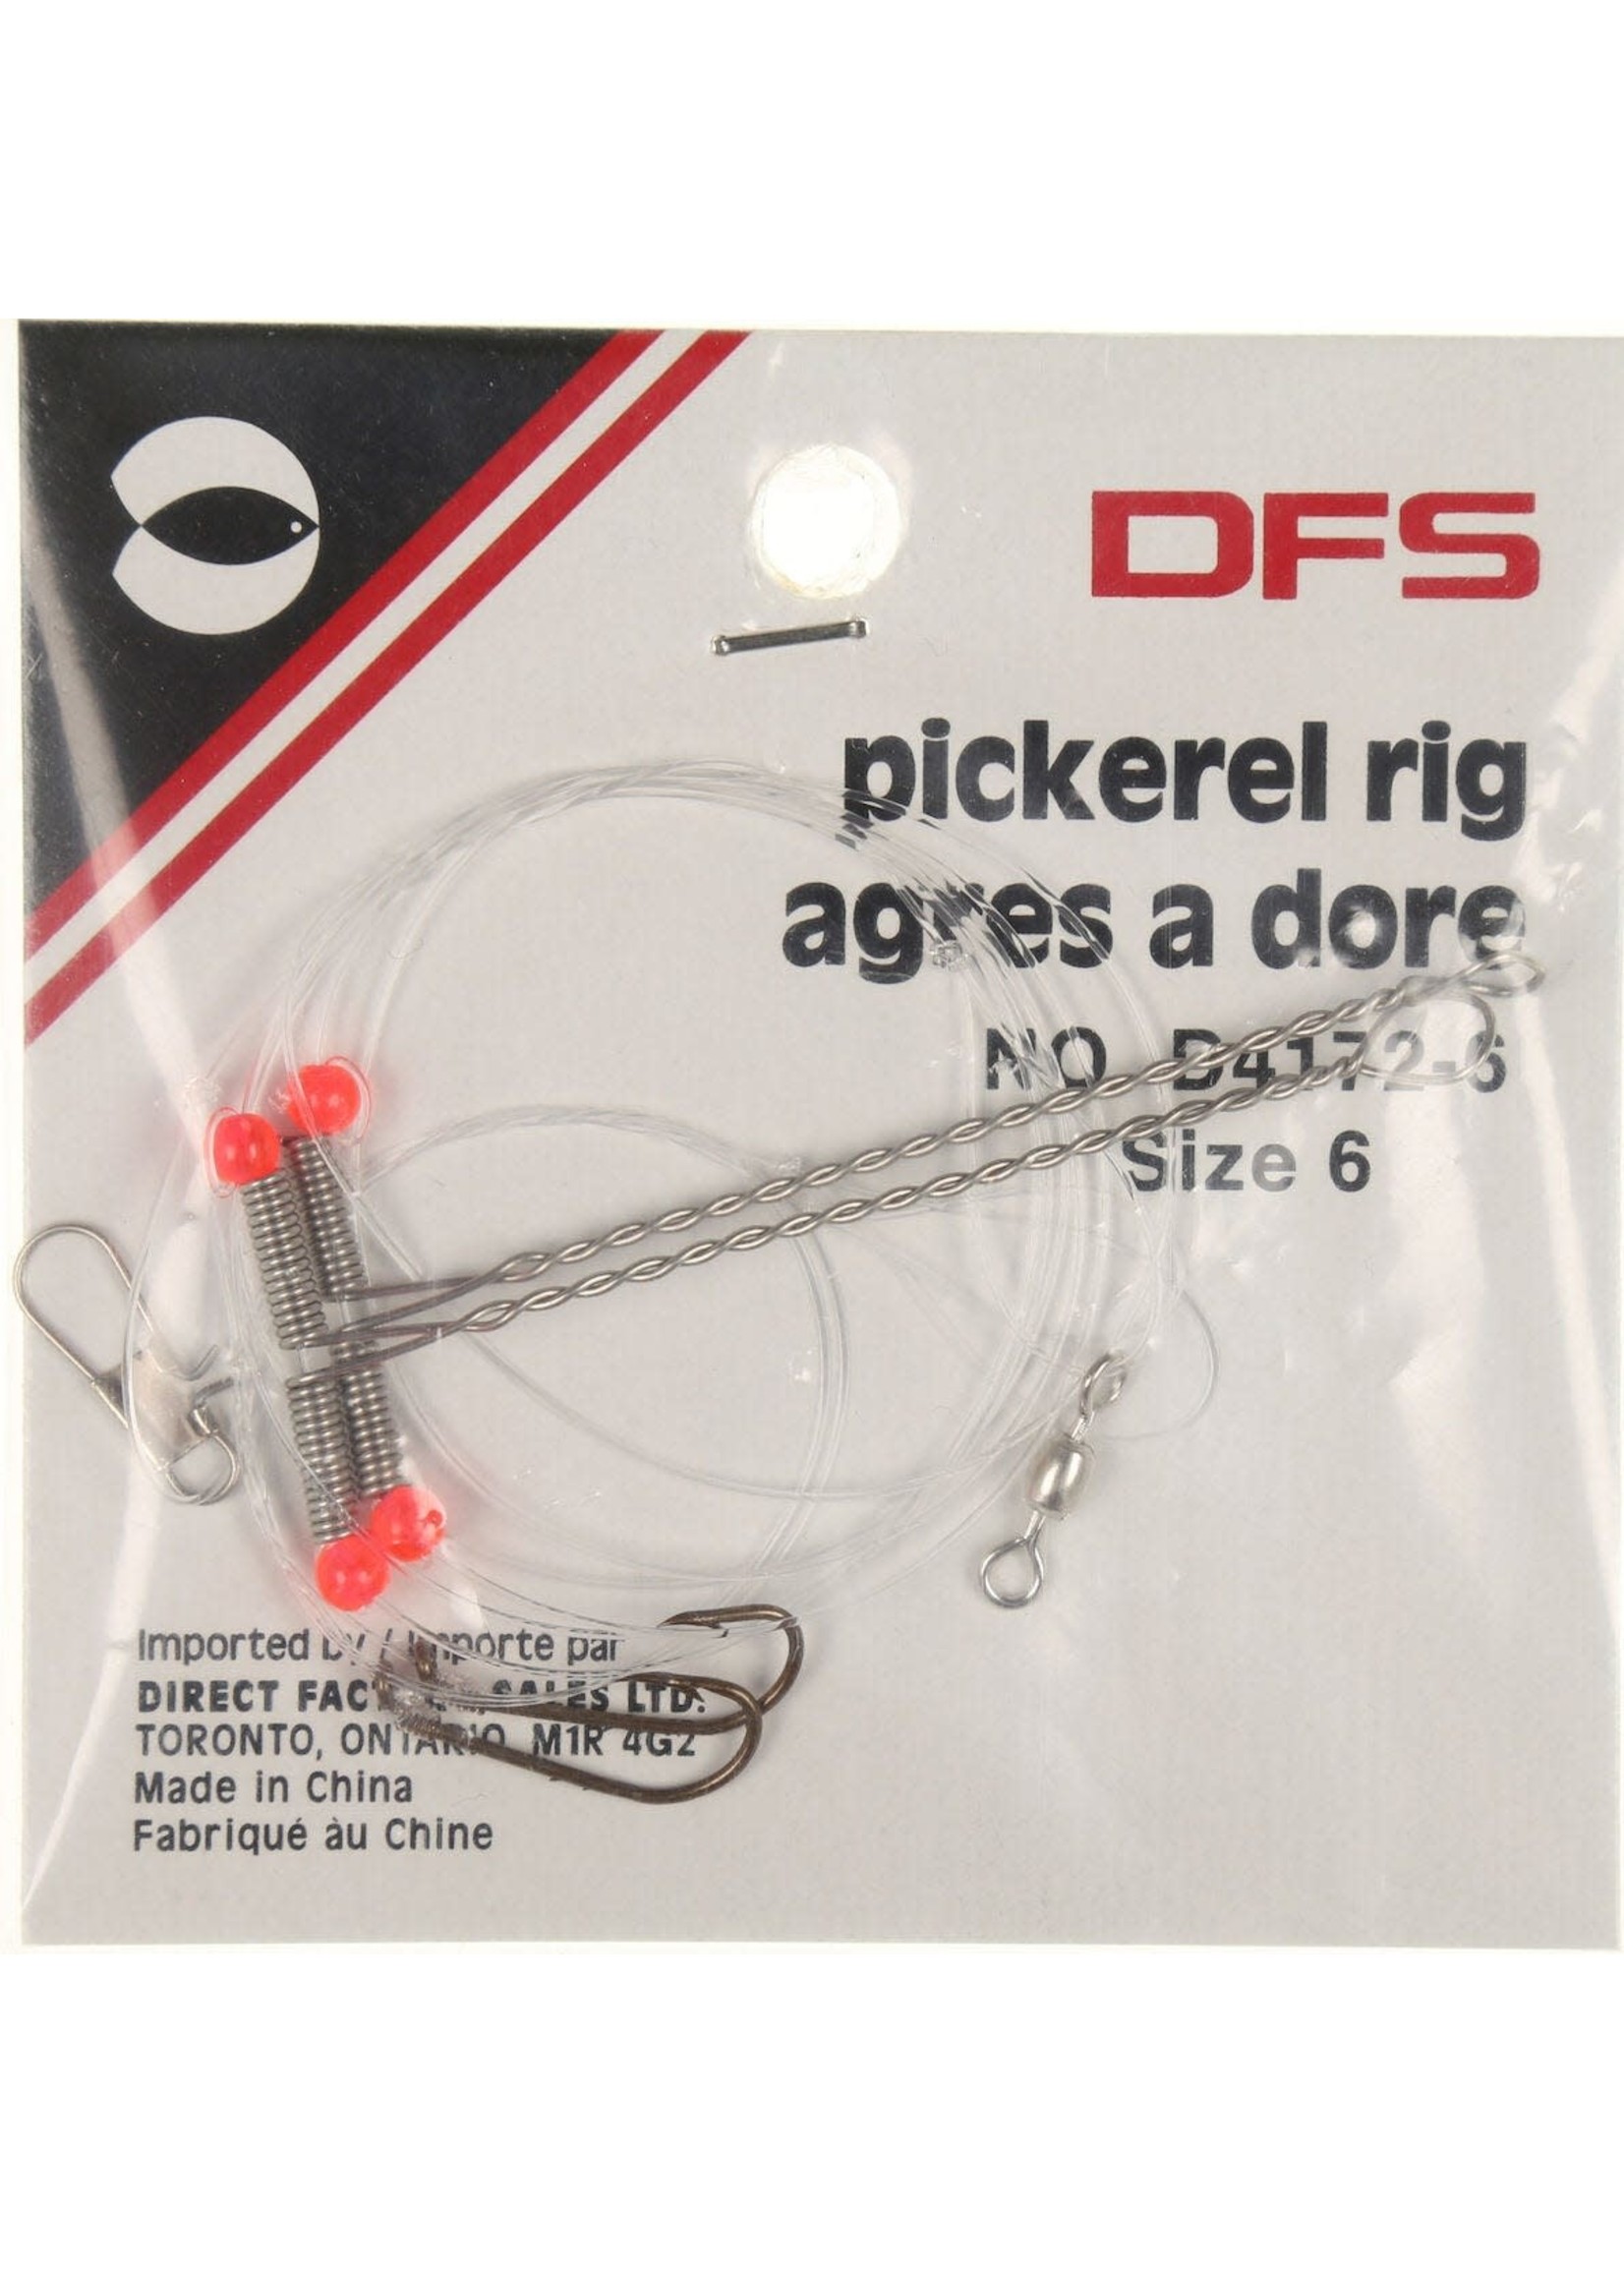 DFS PICKEREL RIGS - Cheap Seats Sports Excellence